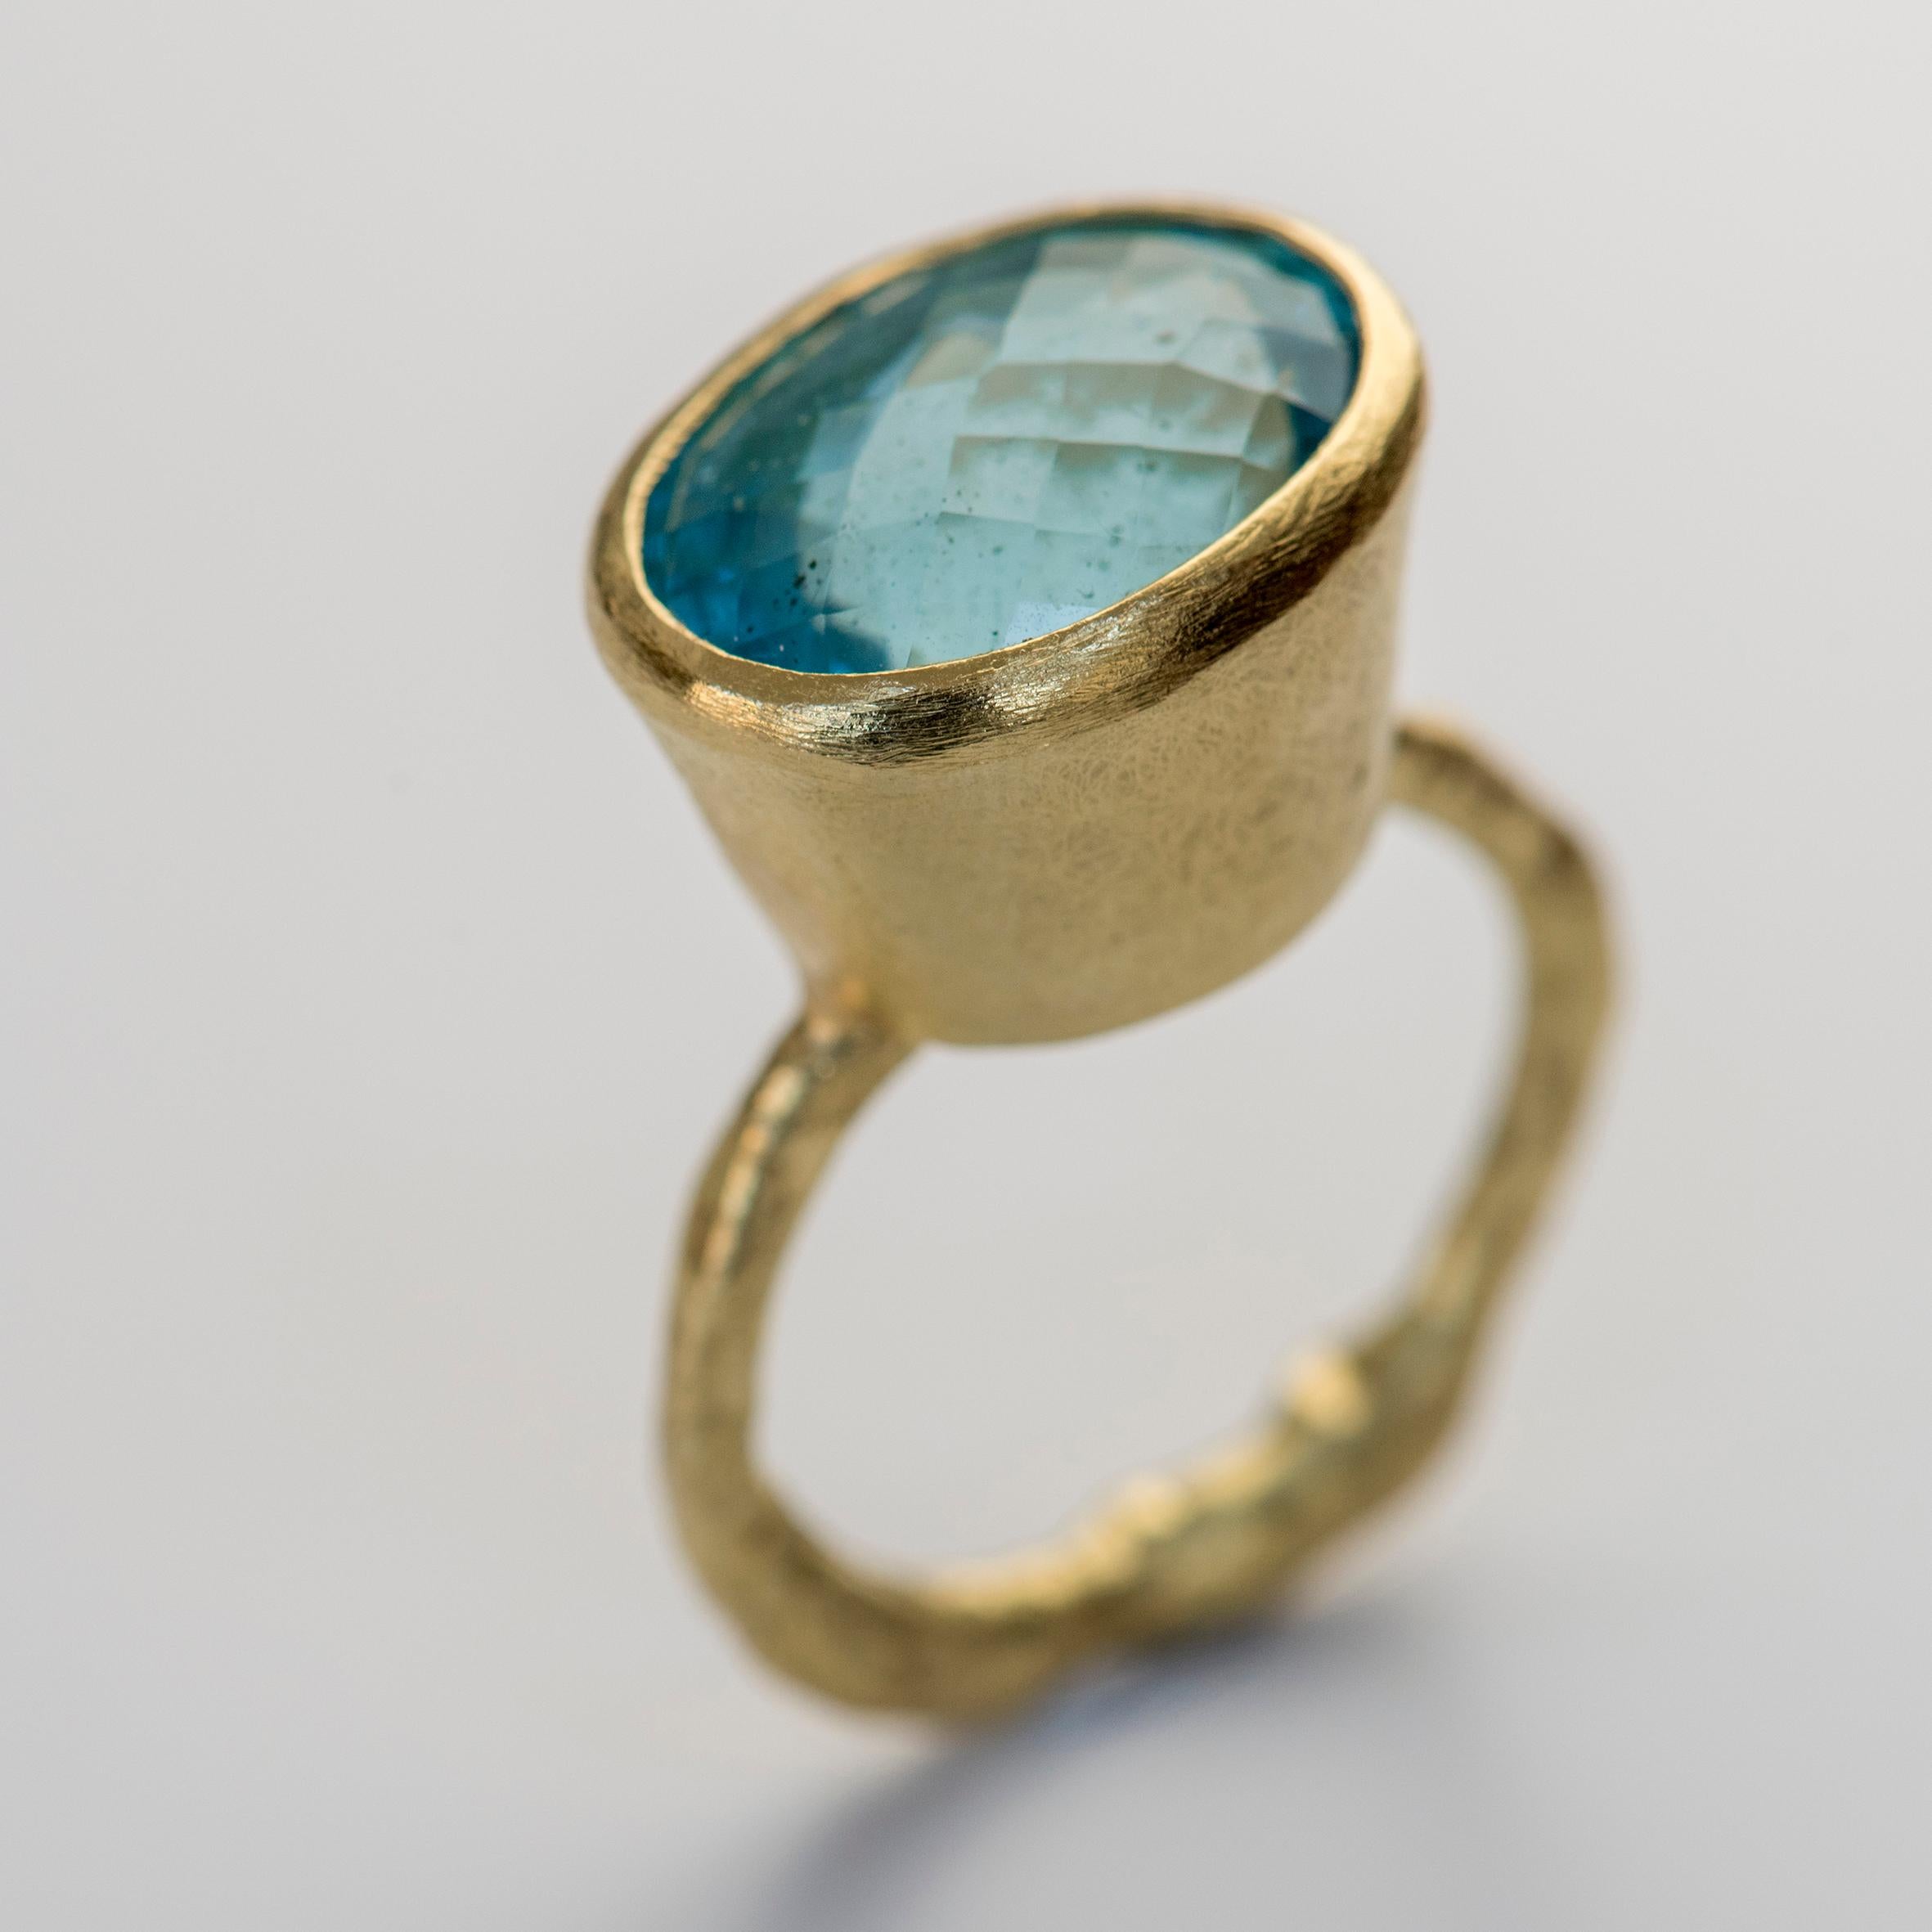 18k yellow gold organic textured cocktail ring with pineapple cut aquamarine, a gorgeous aqua blue colour, 11.28 carats, 16x14mm oval.

Handmade by internationally renowned goldsmith Disa Allsopp. Disa is inspired by ancient cultures such as the